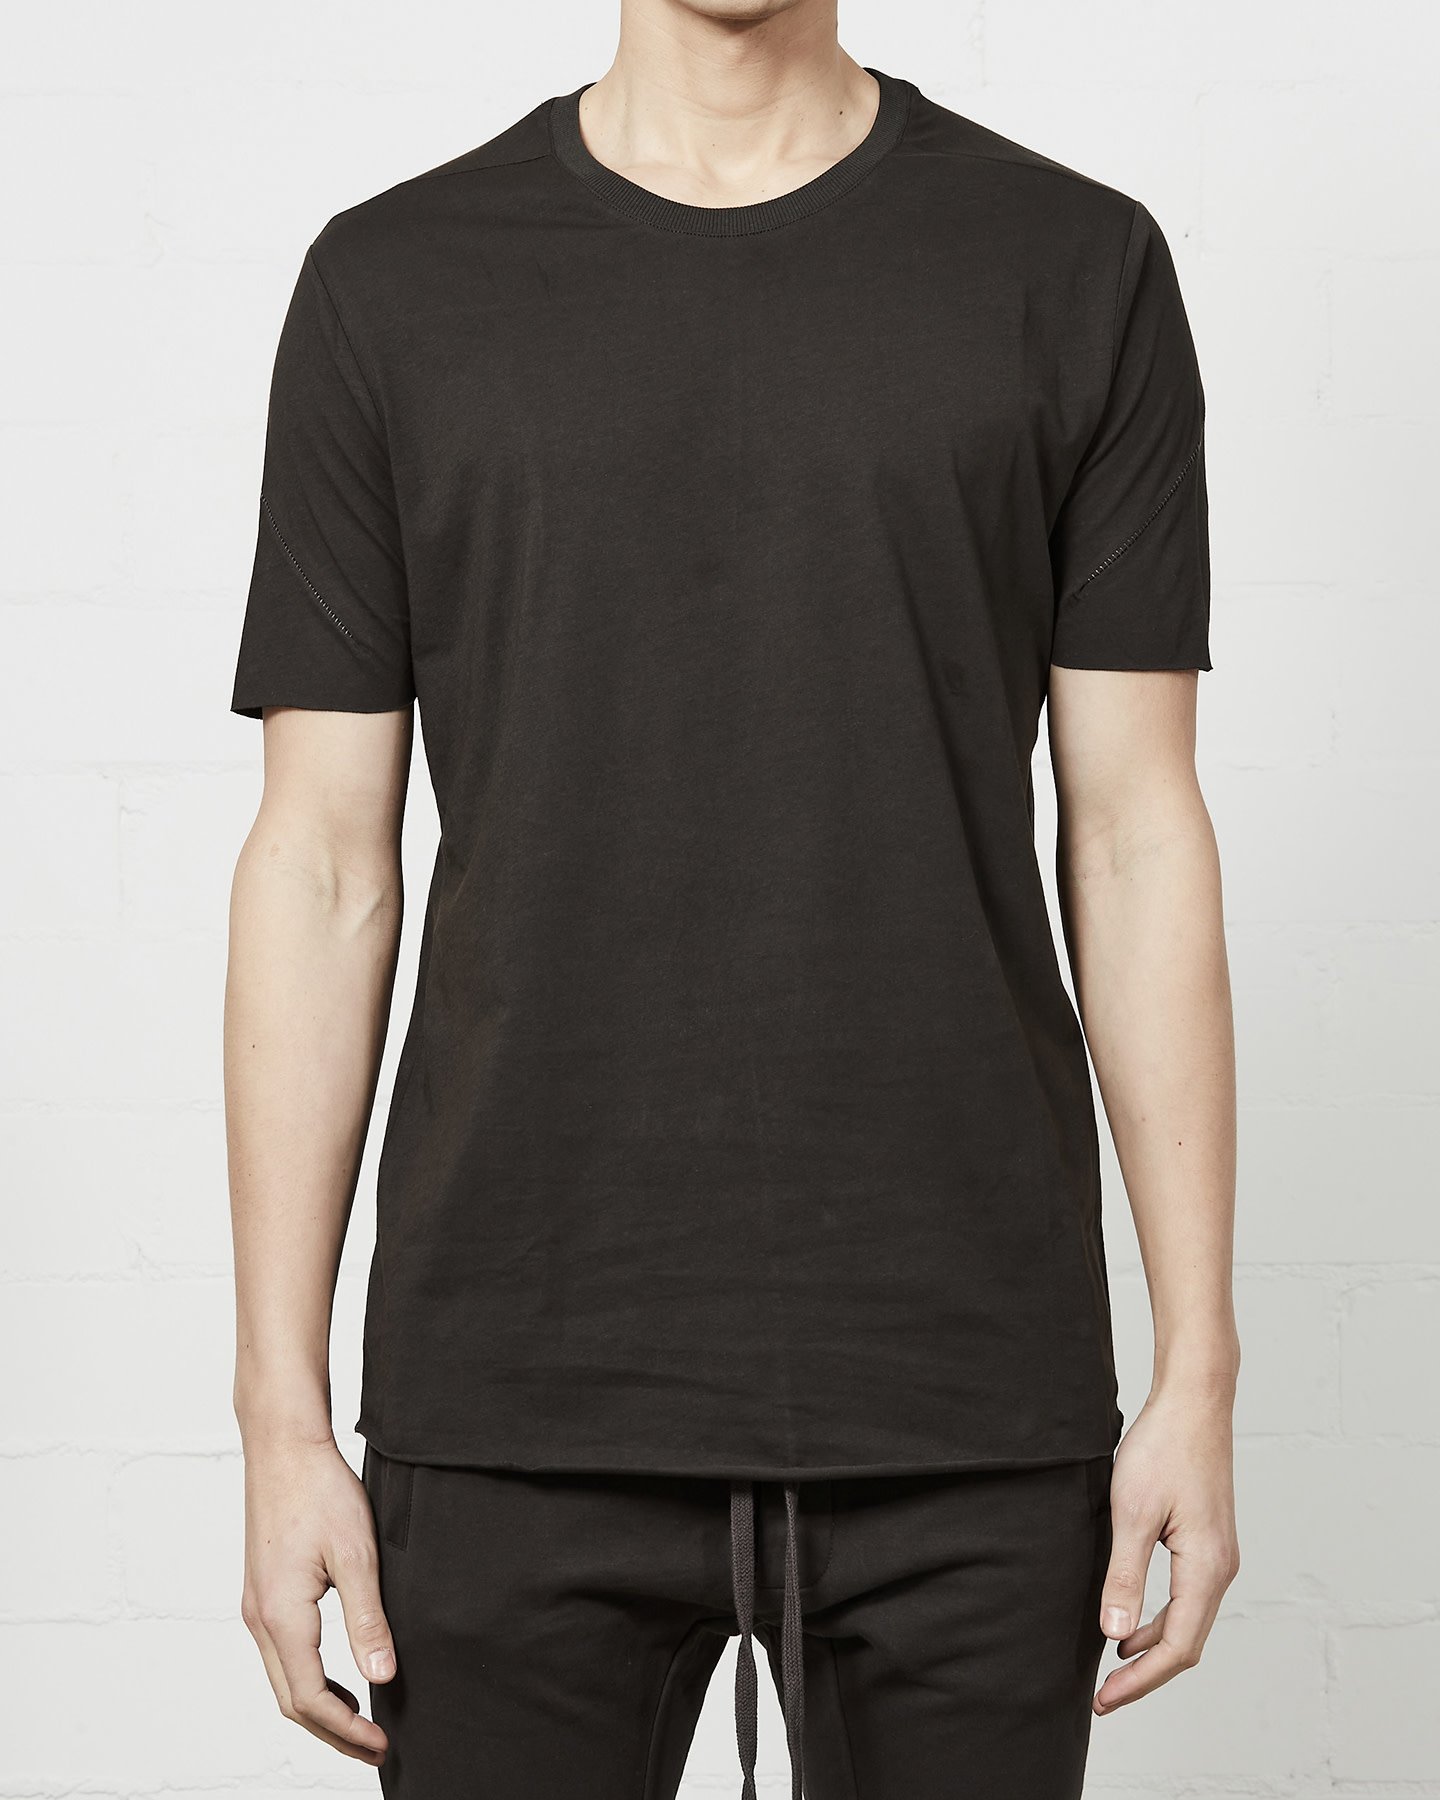 STITCHED BACK FITTED COTTON CREW - BROWN